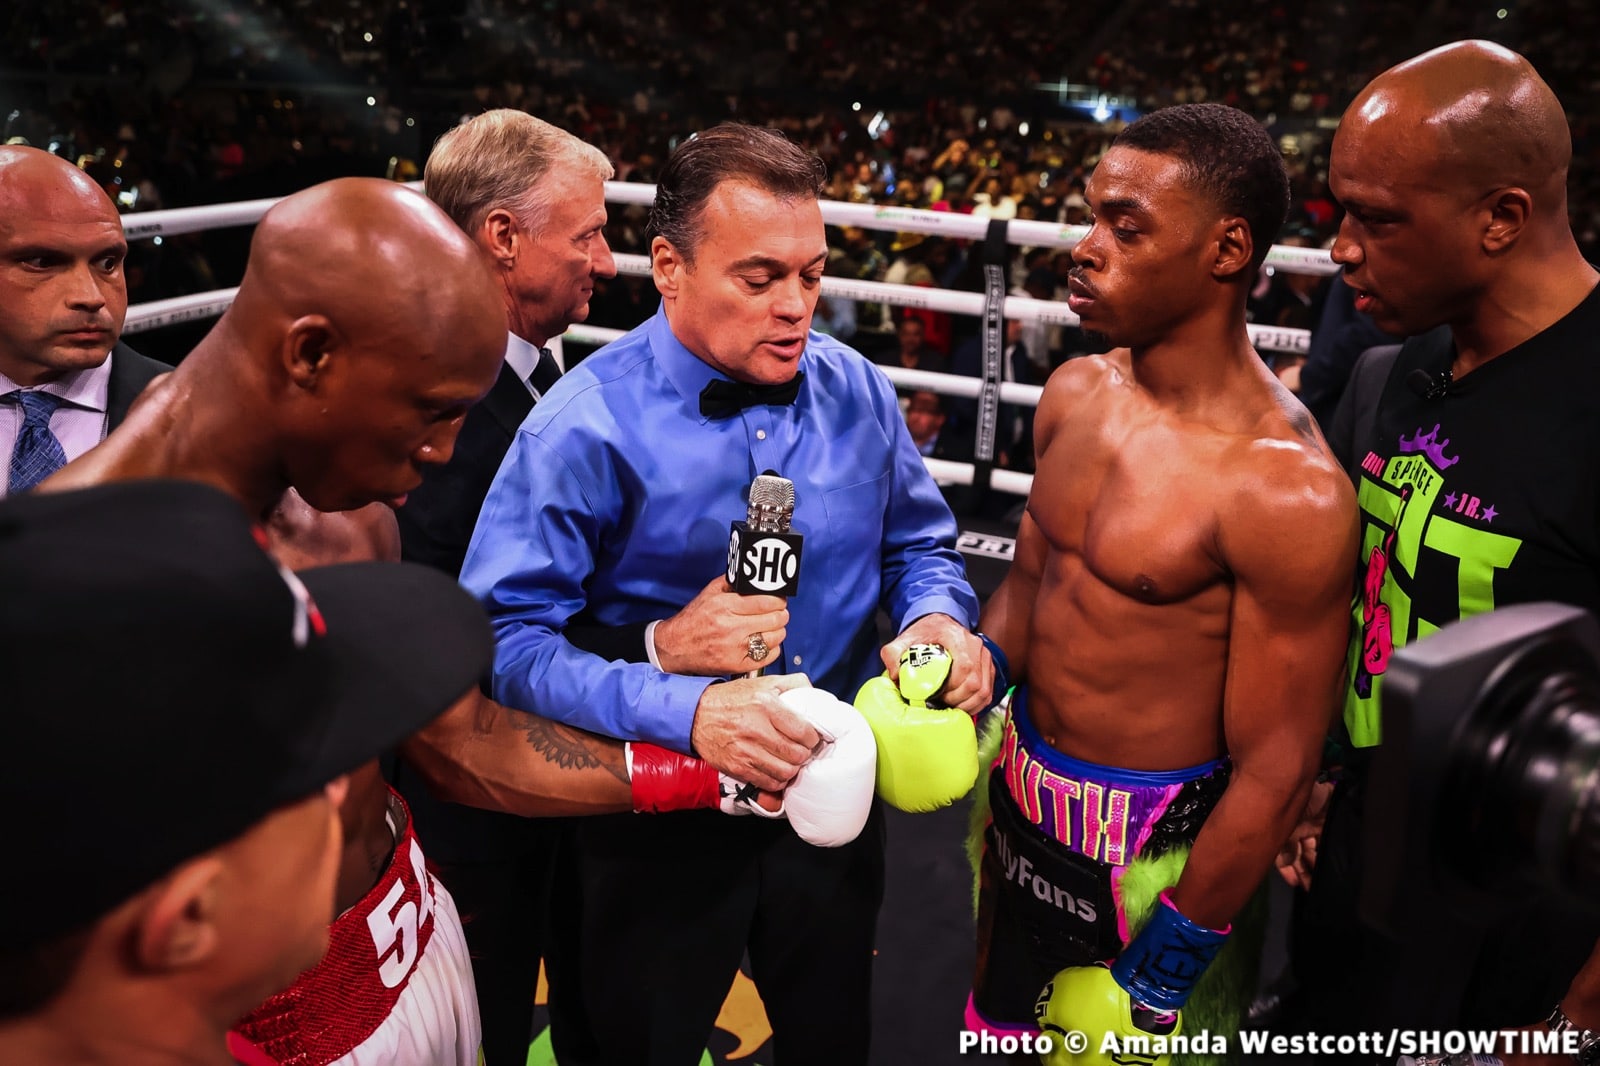 Image: Errol Spence is the "better fighter" than Crawford says Abel Sanchez